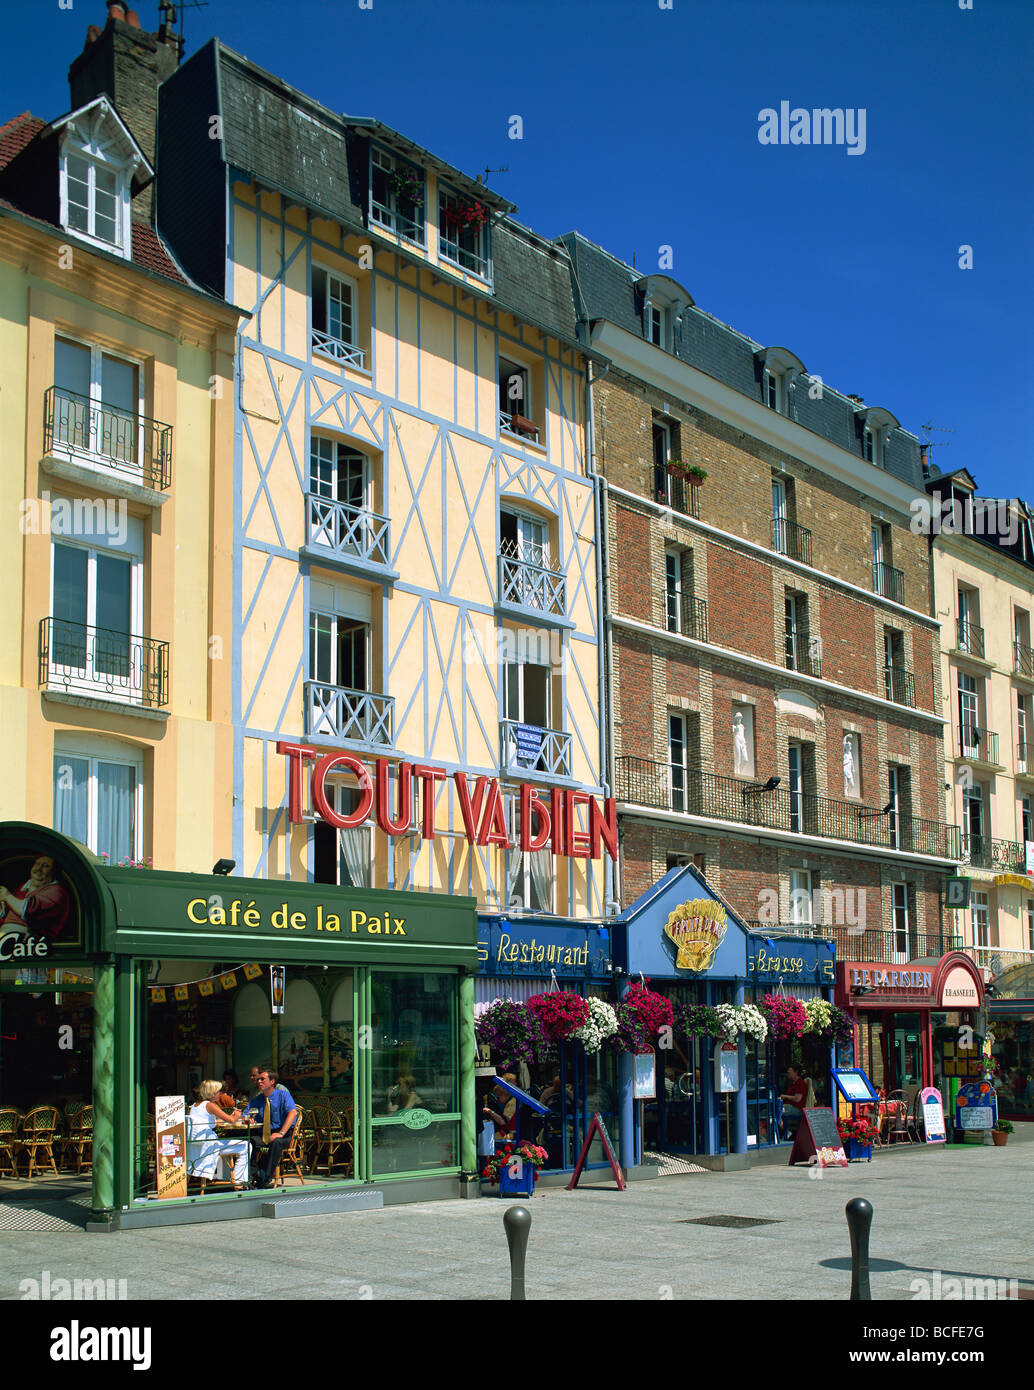 France Normandy Dieppe Cafes Stock Photo